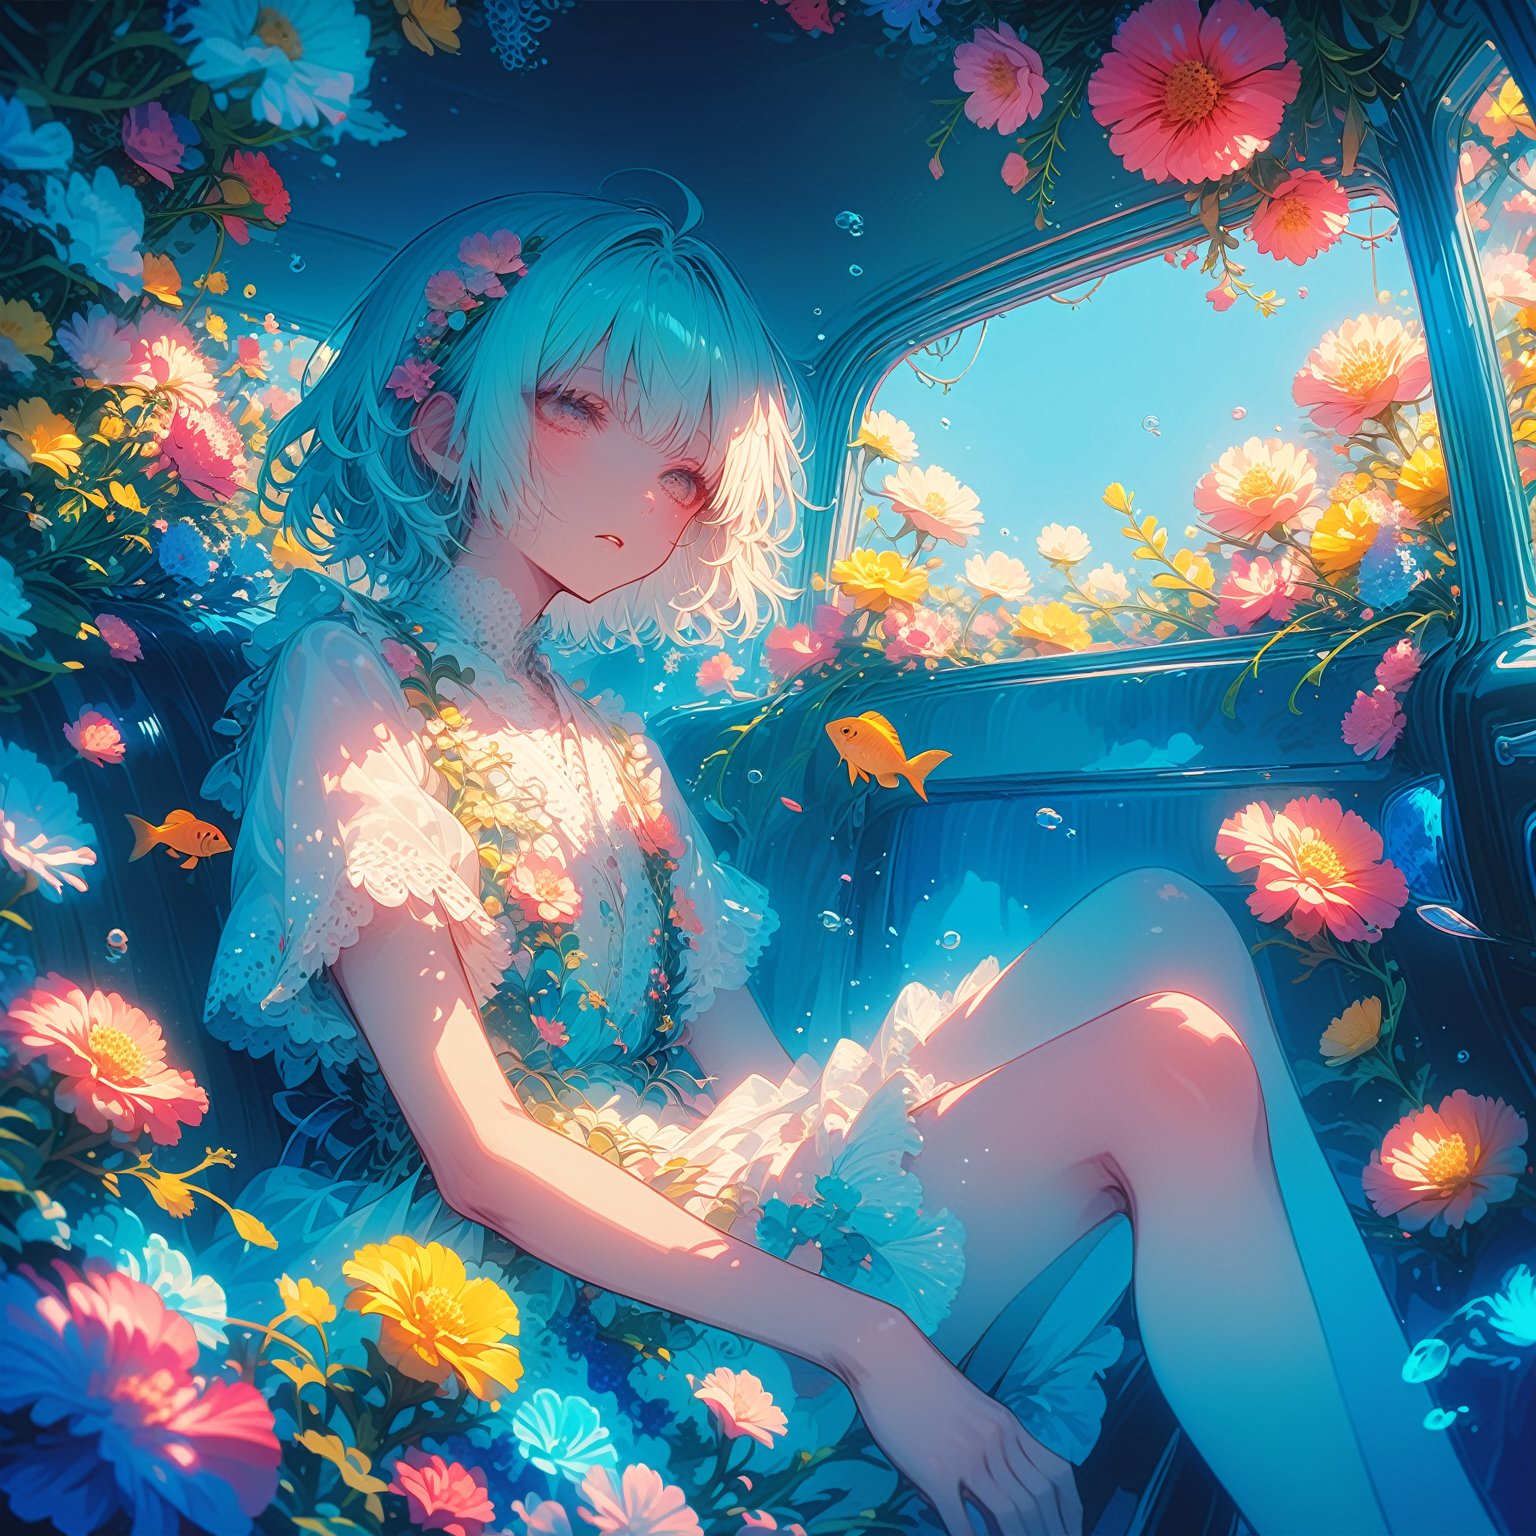 Simple minimum art, myths of another world,
pagan style graffiti art, aesthetic,
1boy, interior of an old car, many beautiful blooming flowers, the car covered with plant vines, the interior of the car, a boy sitting in the car, the car is sunk at the bottom of the sea, beautiful flowers and coral reefs, many jellyfish surround the boy, flower car, in car,anime,underwater,emo,dal-1